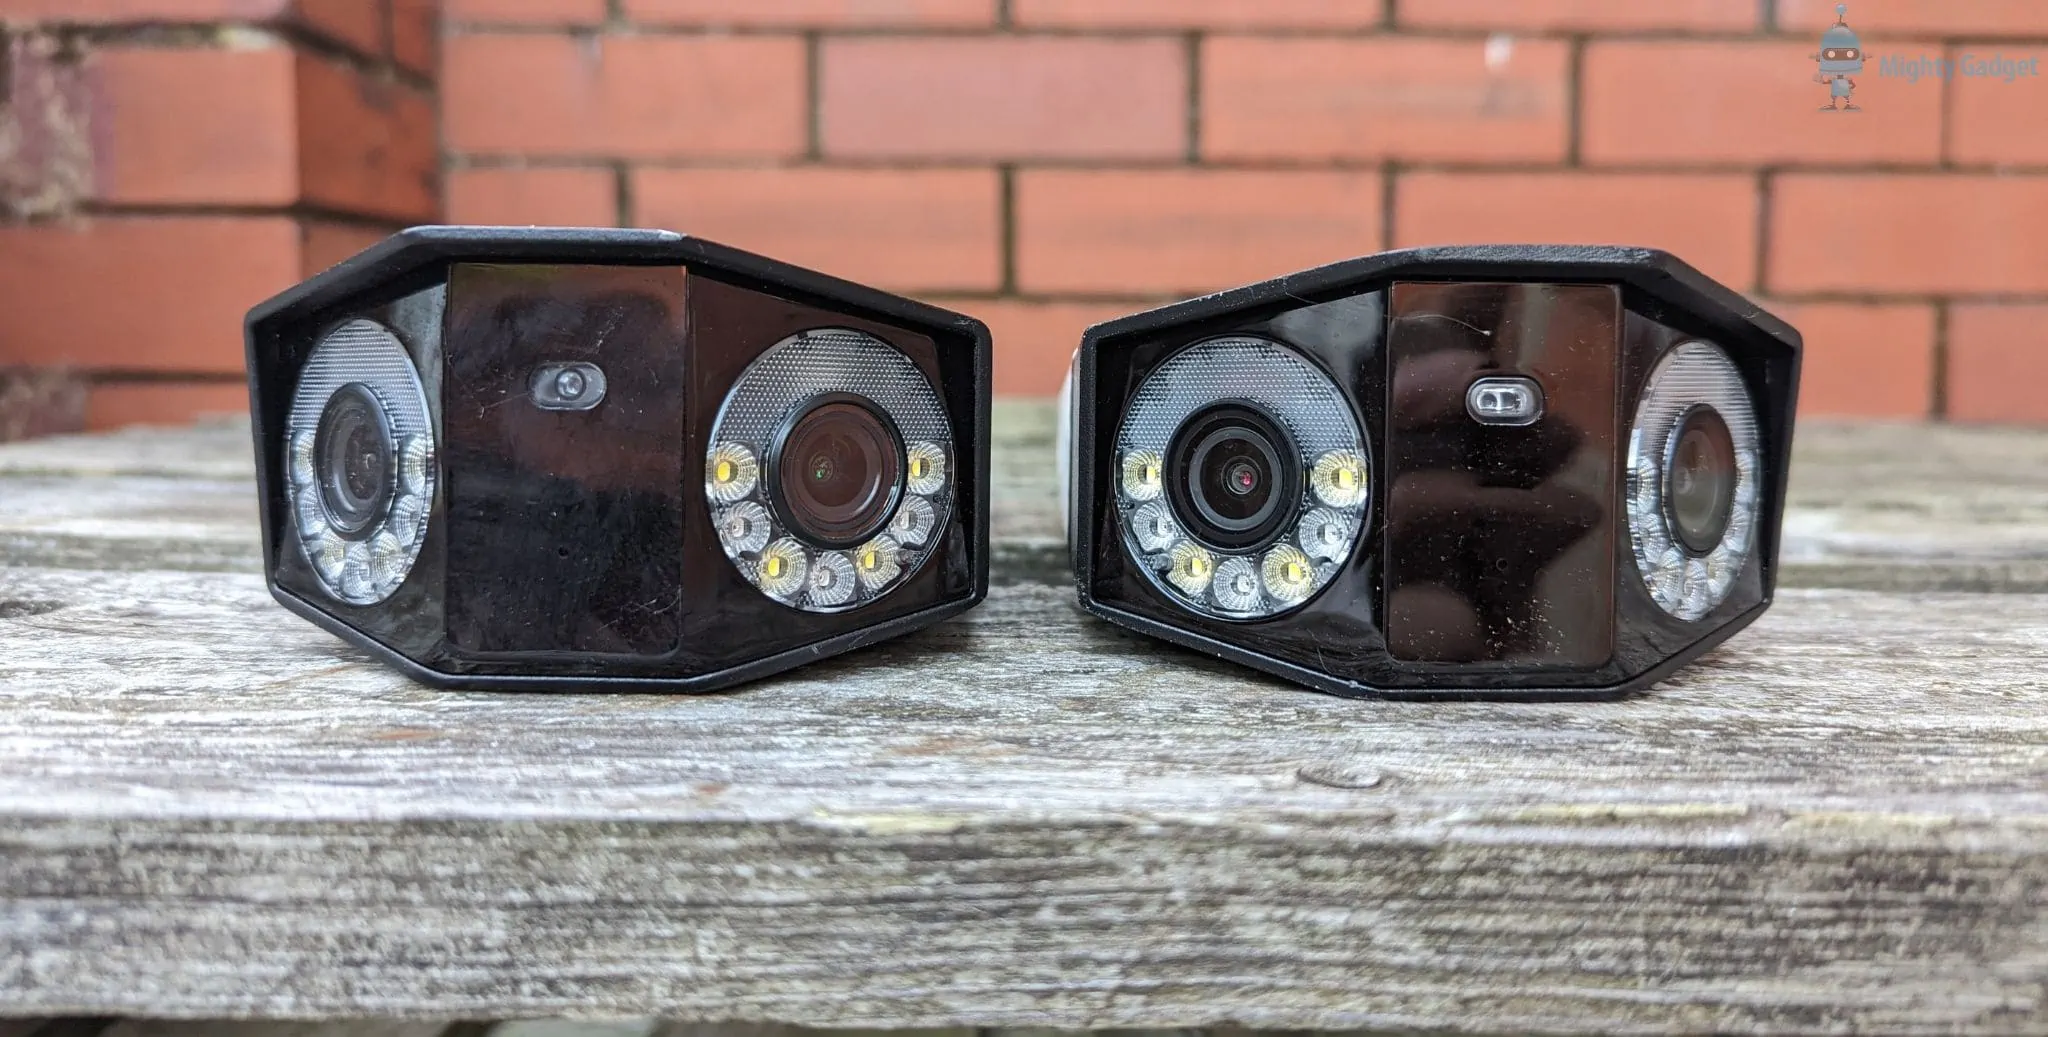 Reolink Duo 2 Review – A significant improvement thanks to one stitched image